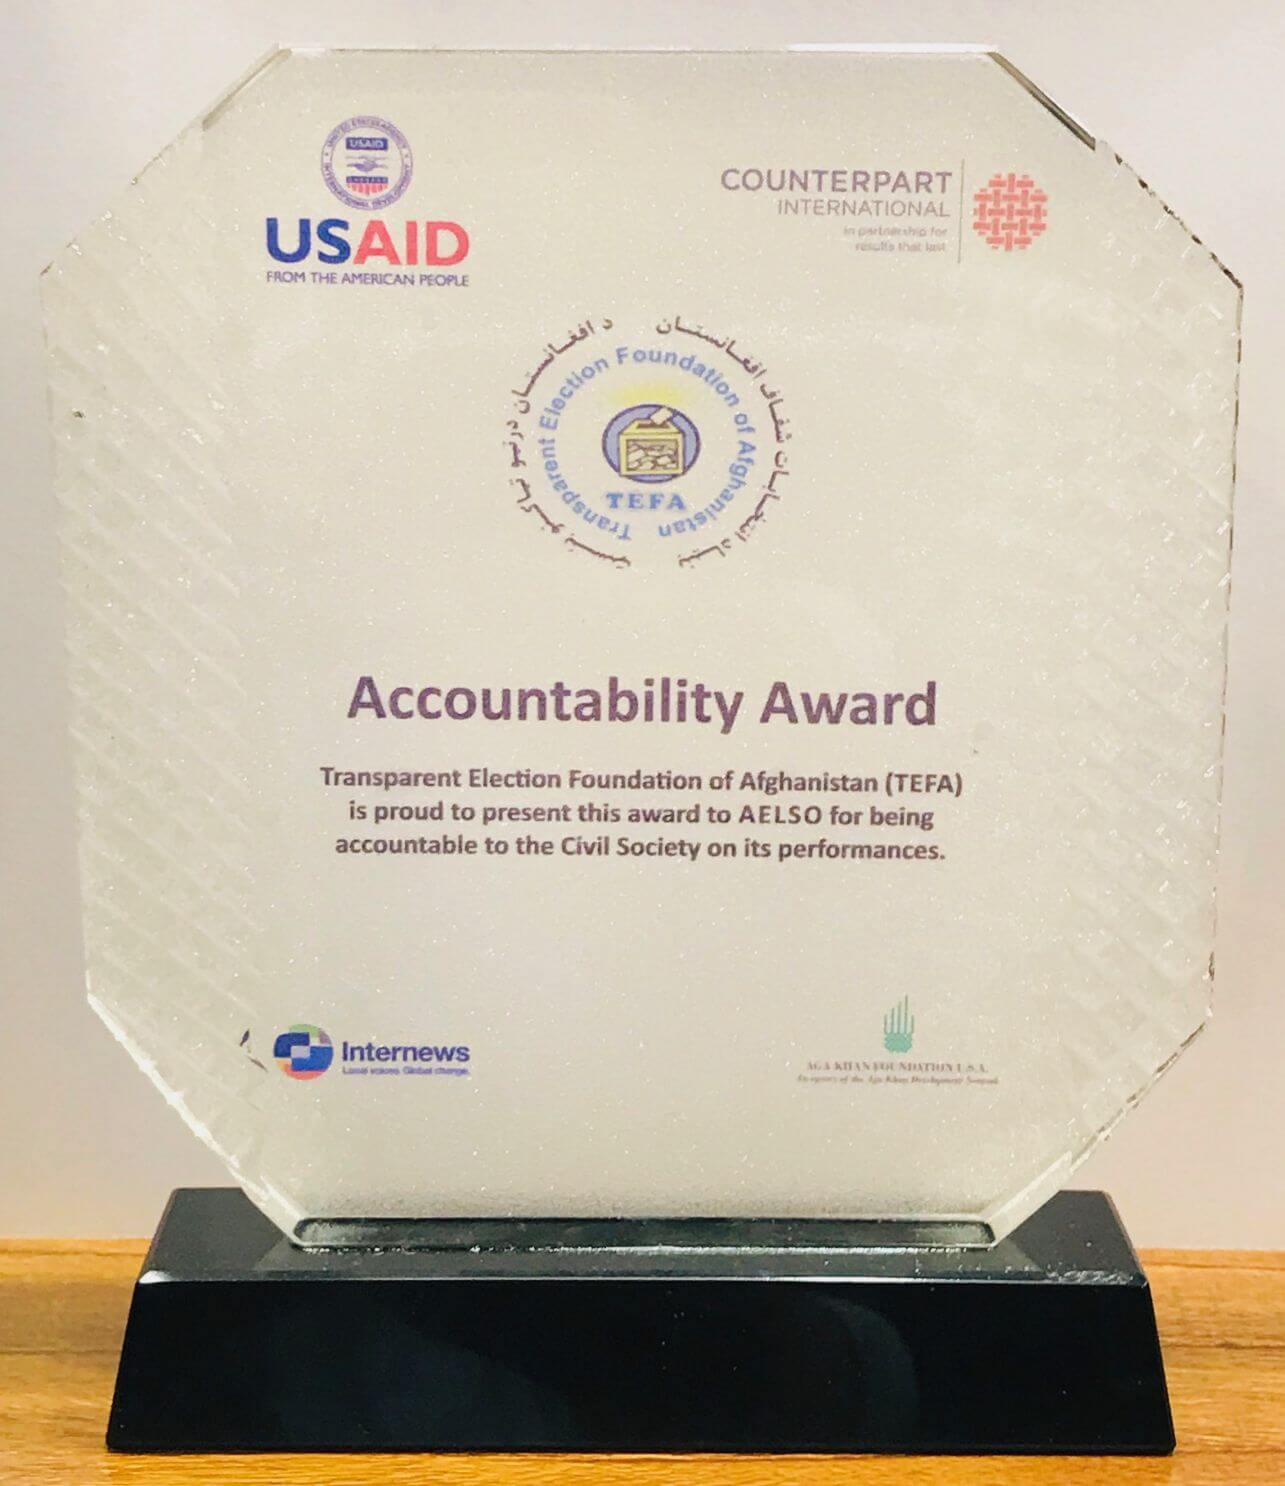 The Award which AELSO received "Excellence in Accountability Award"